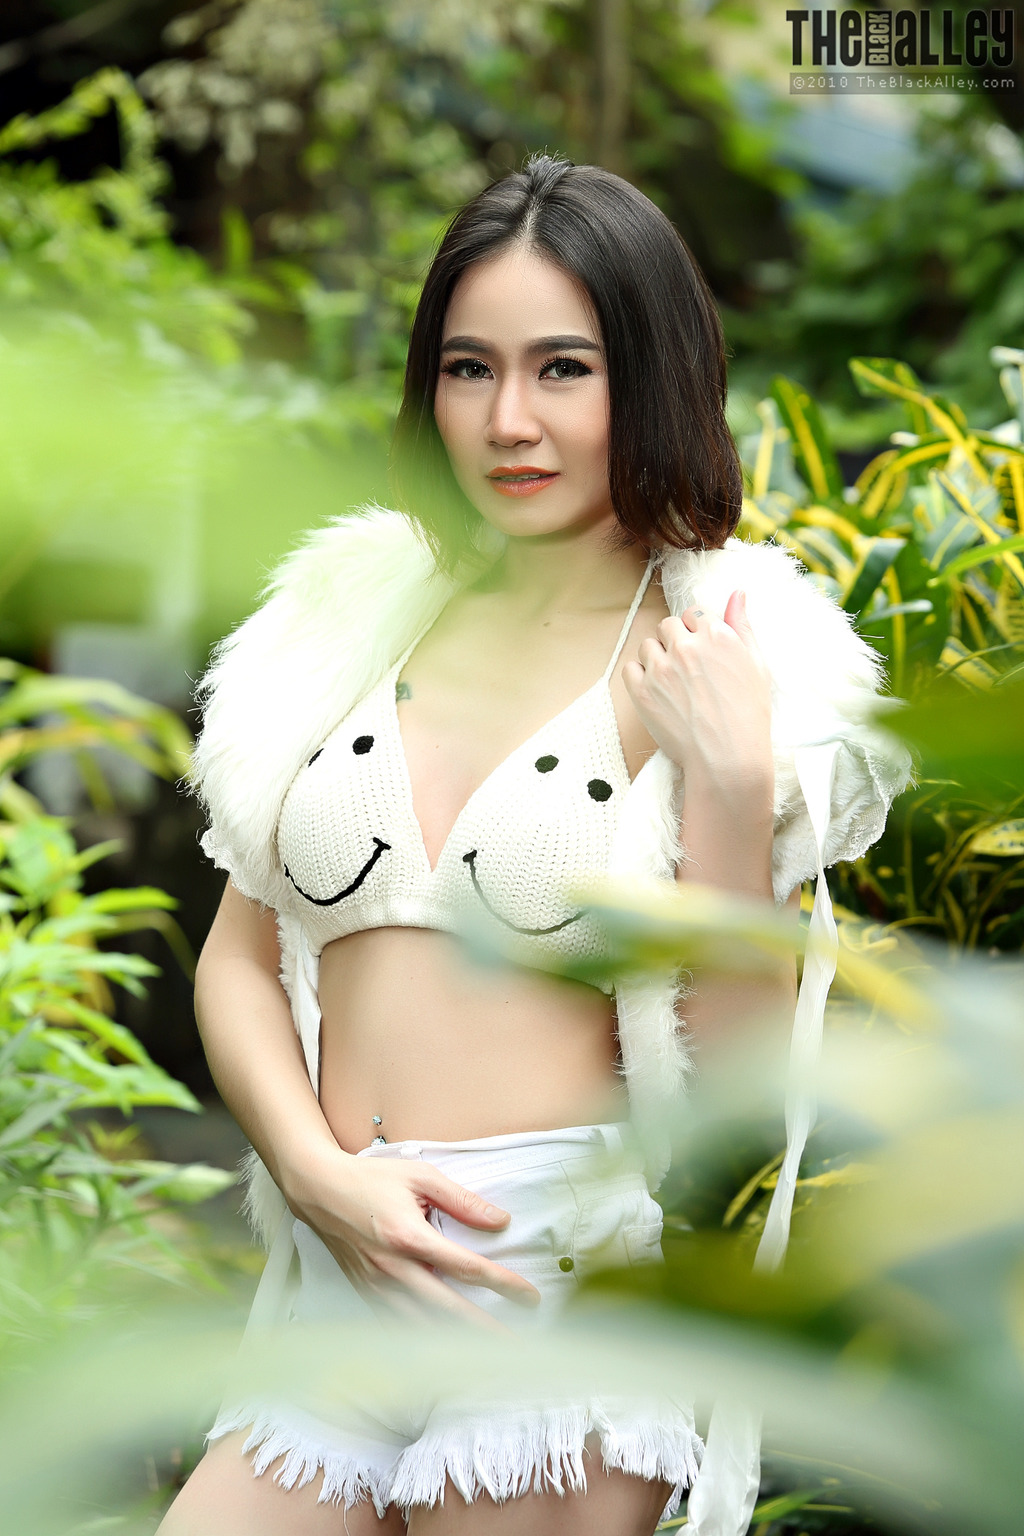 PHOTO | Busty asian strips outdoors 00 - Busty Asian Strips Outdoors